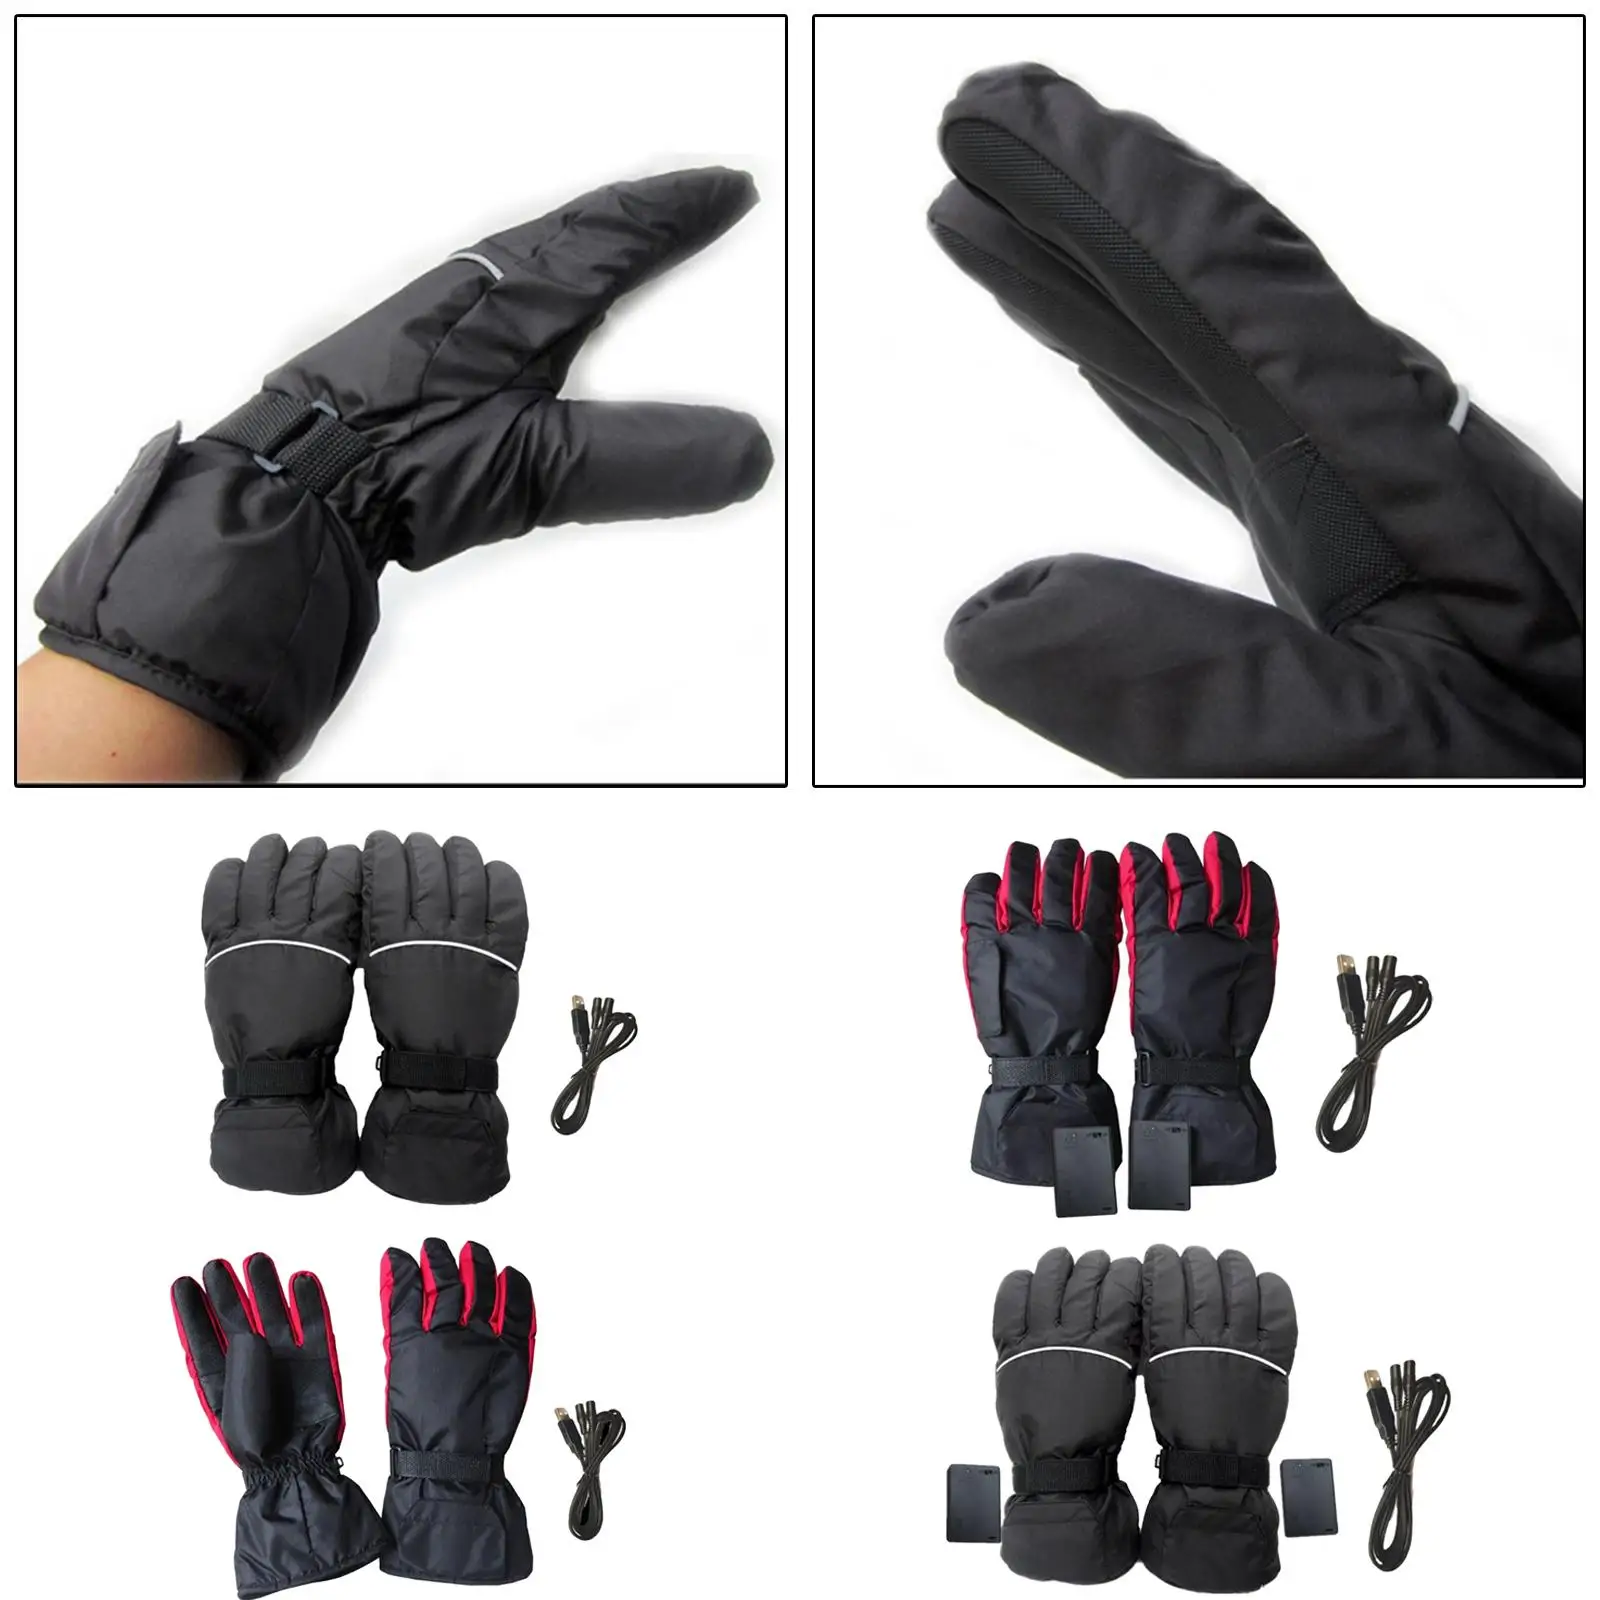 

Motorcycle Heated Gloves Windproof Mittens Winter Warm for Outdoor Activities Cycling Riding Ski Hand Warmer